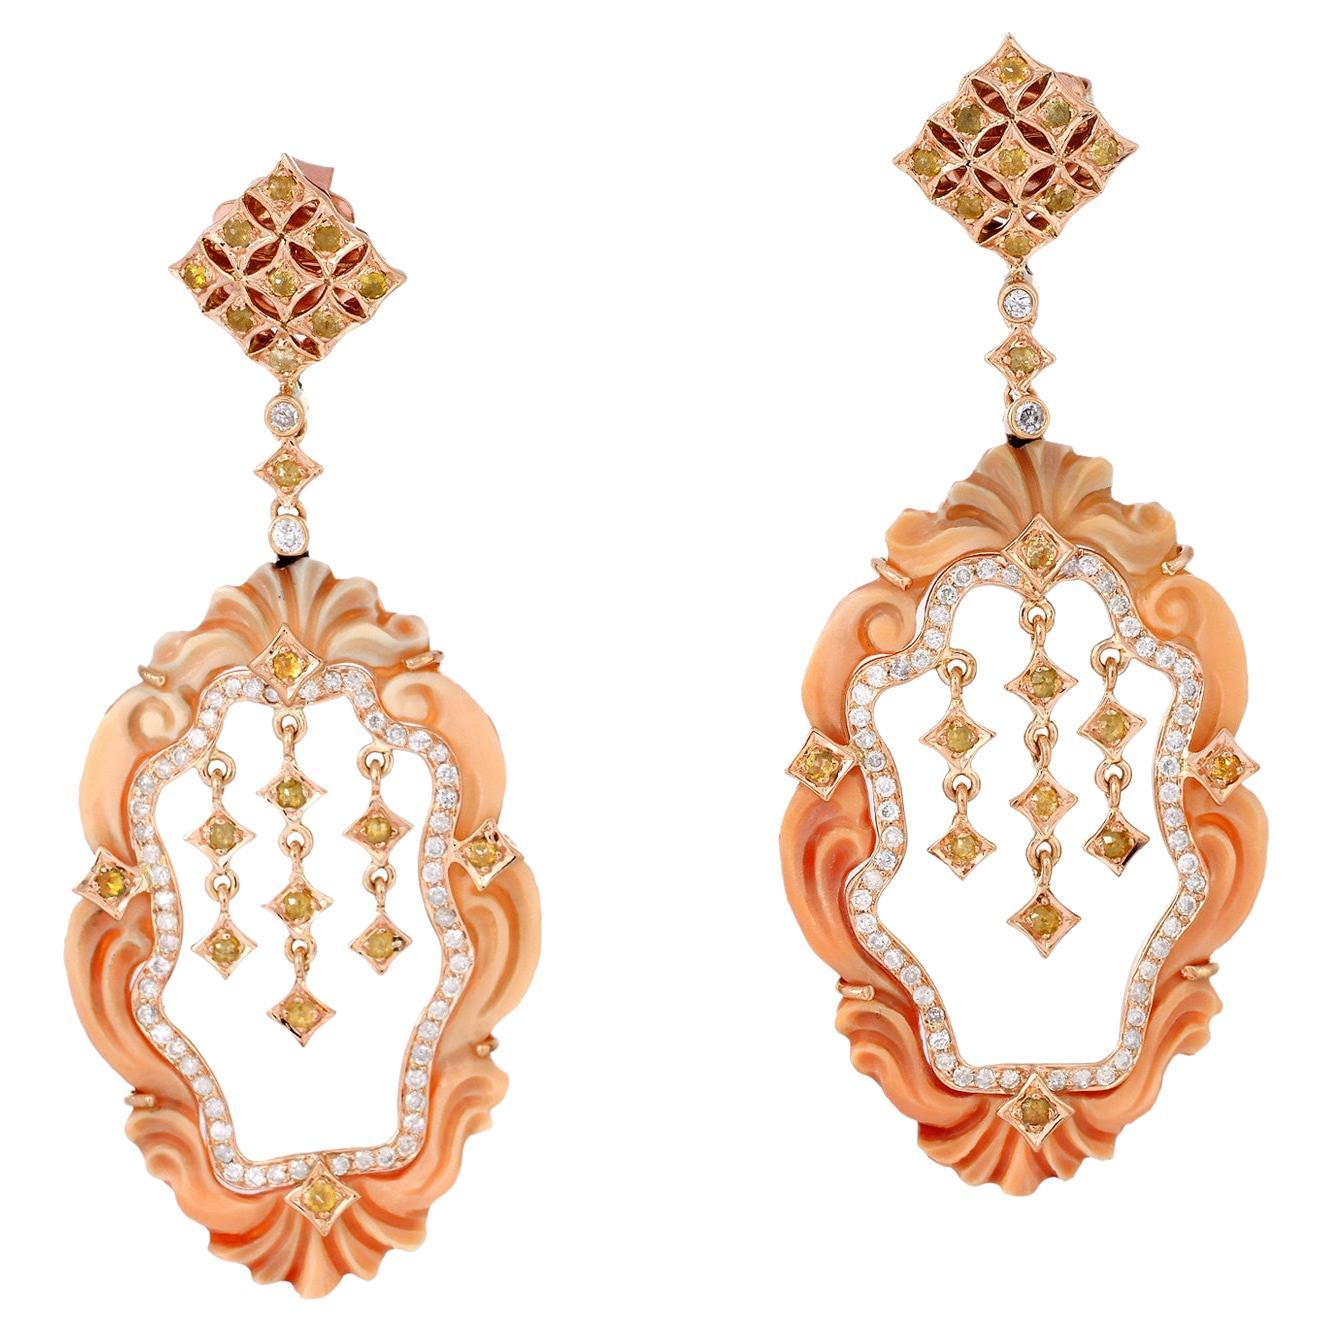 Earrings at Auction